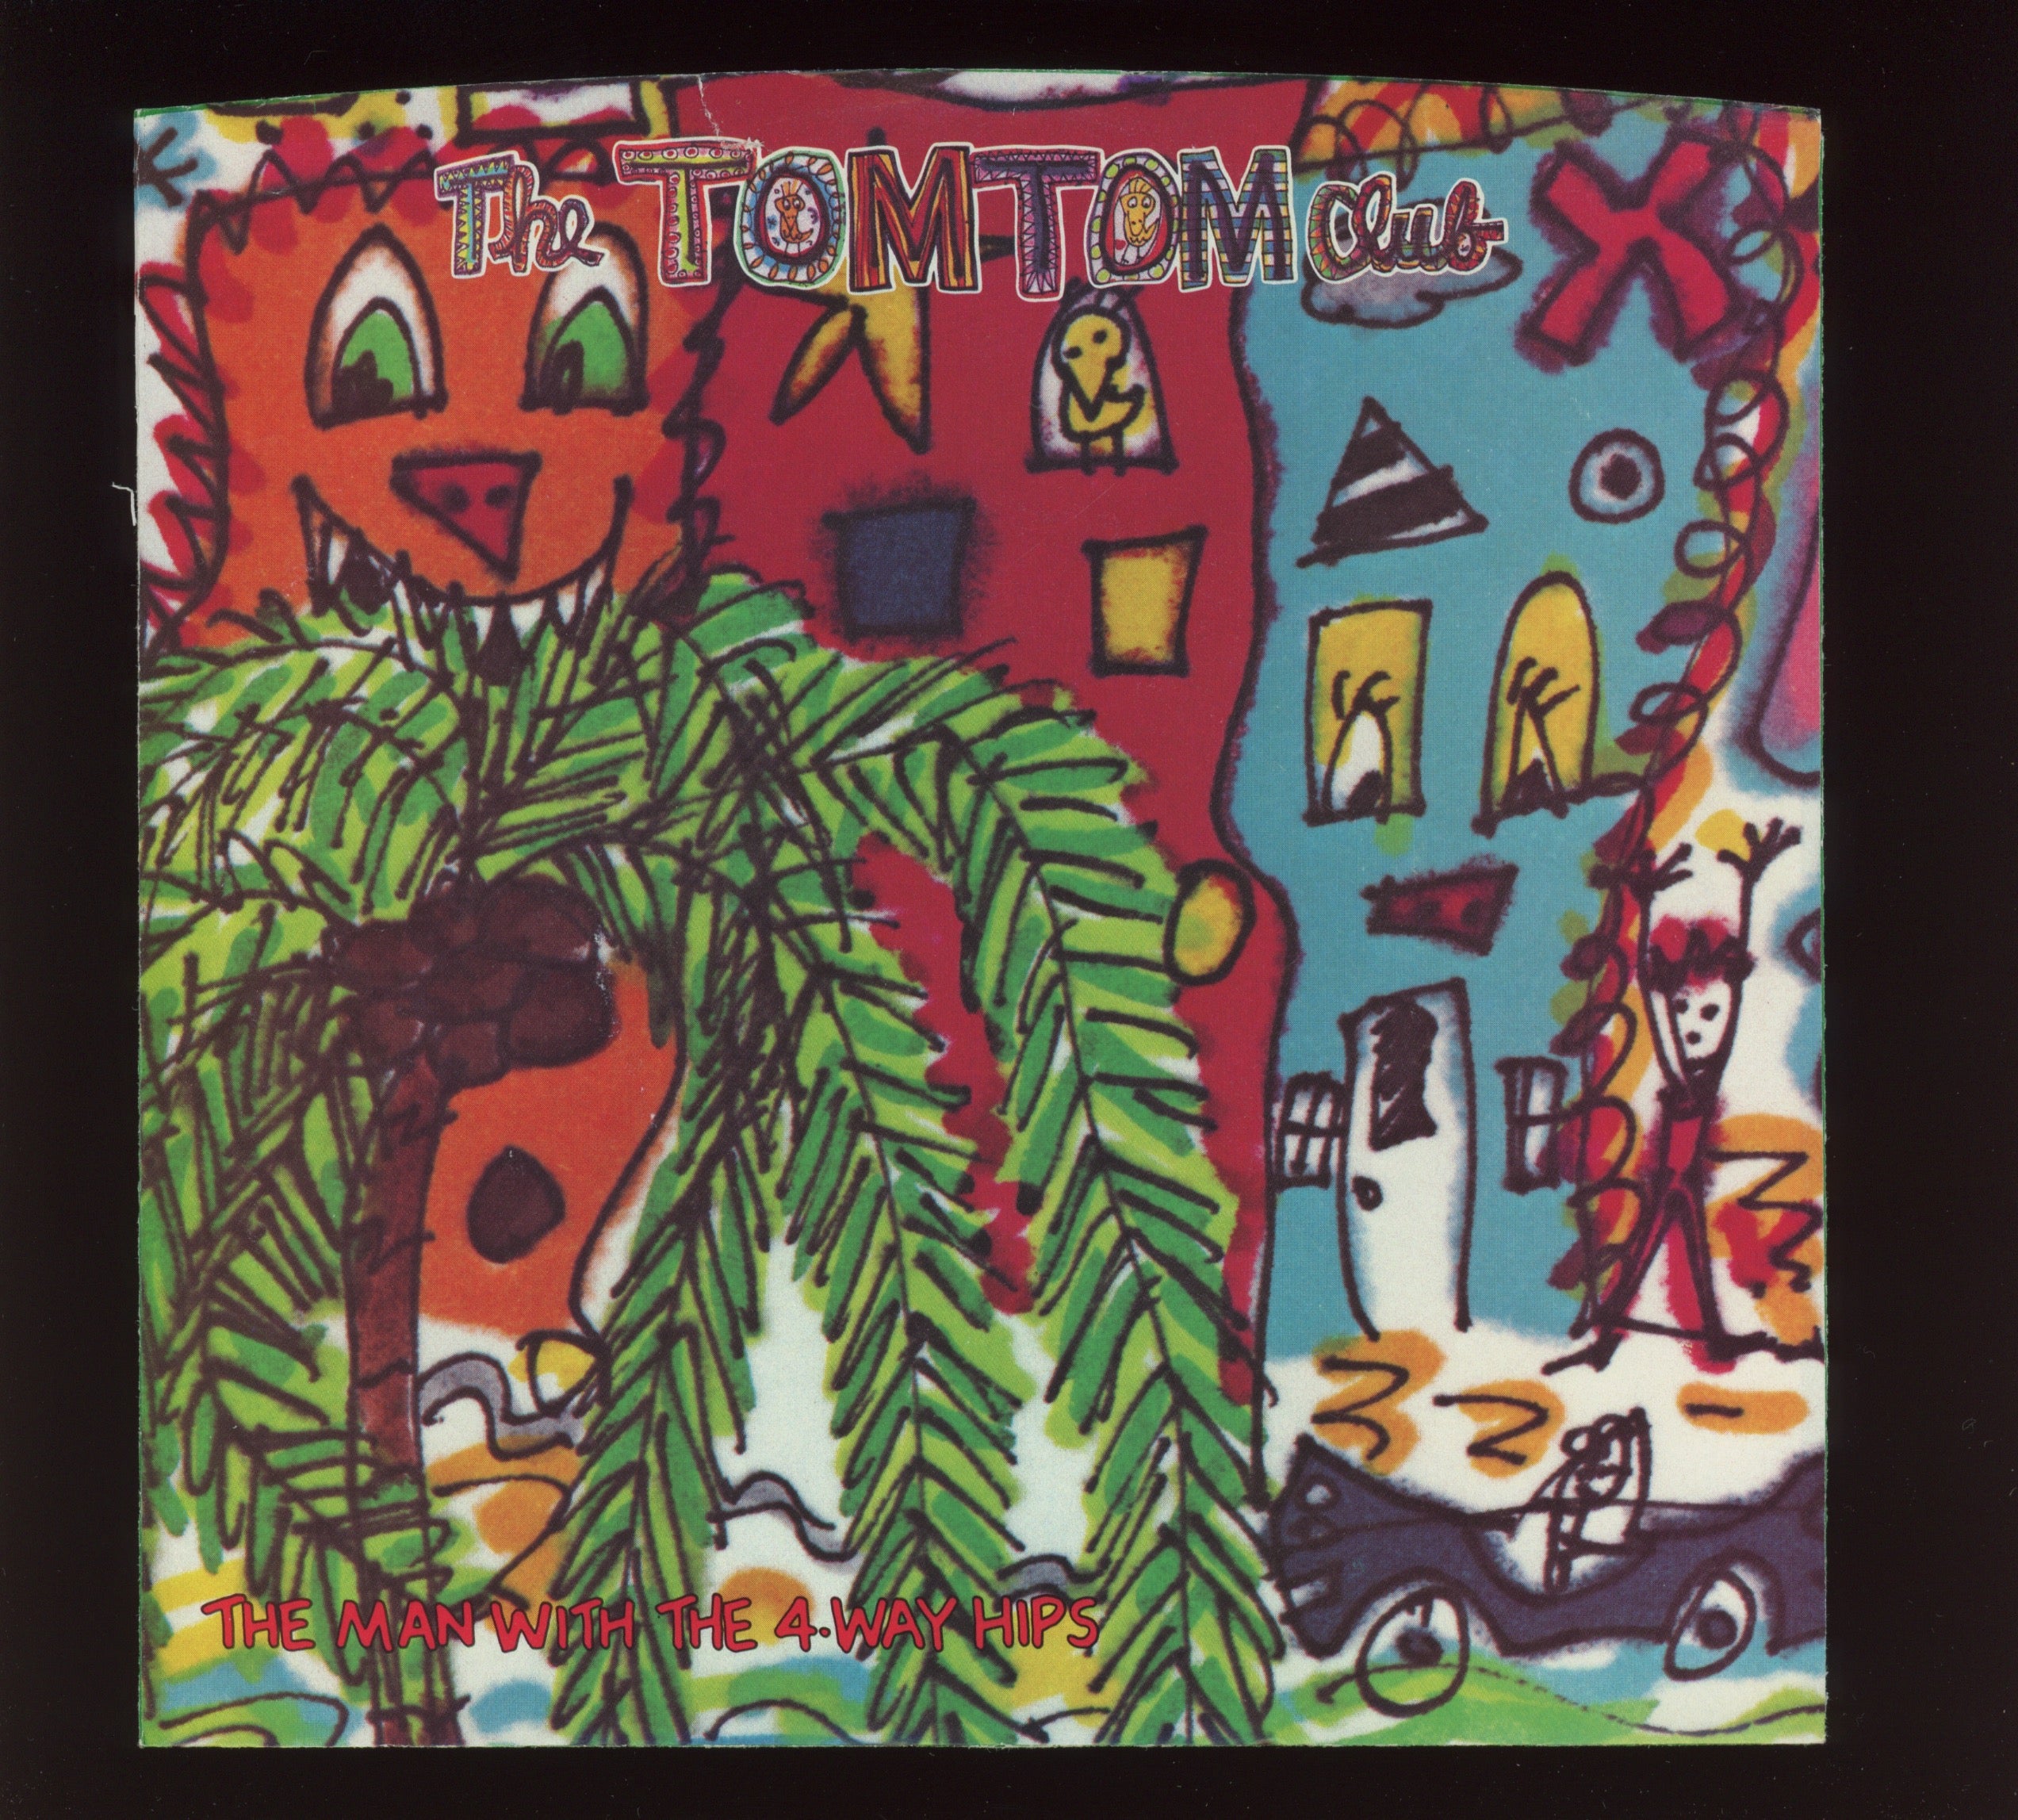 Tom Tom Club - The Man With The 4-Way Hips on Sire With Picture Sleeve